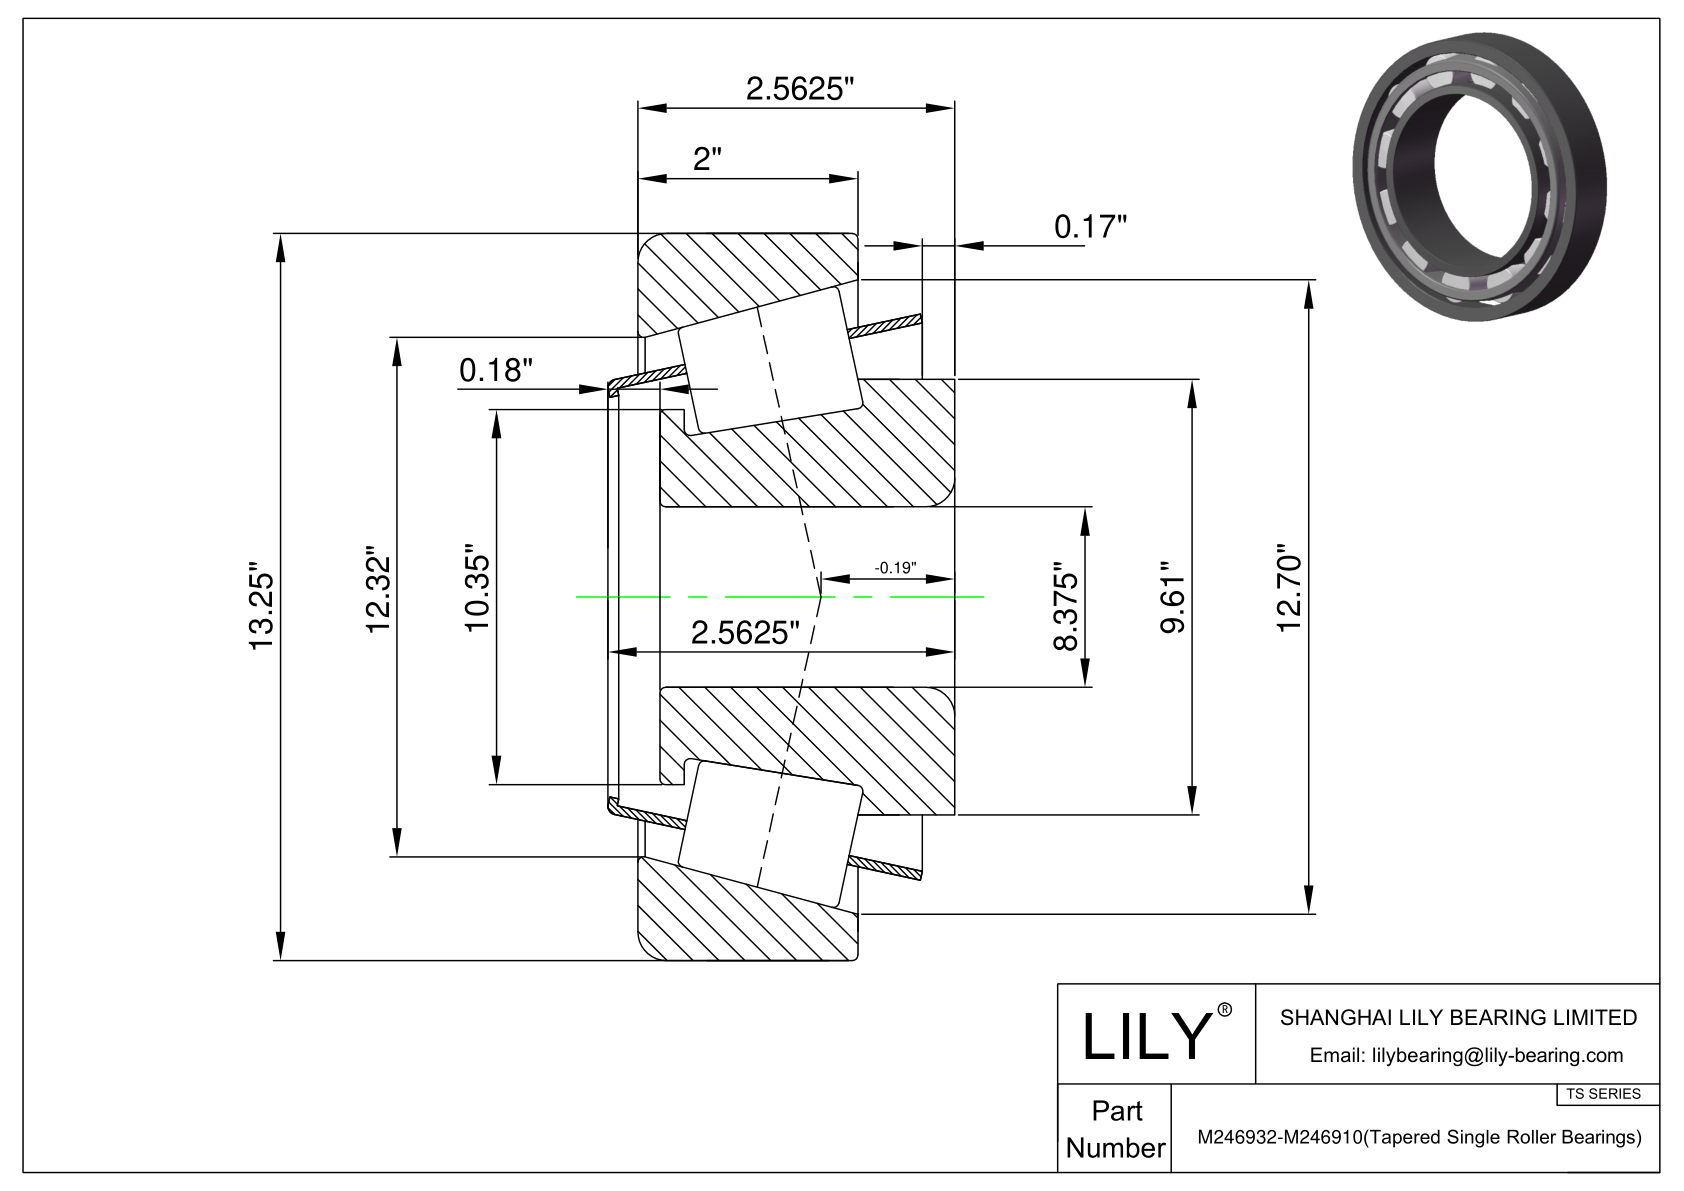 M246932-M246910 TS (Tapered Single Roller Bearings) (Imperial) cad drawing